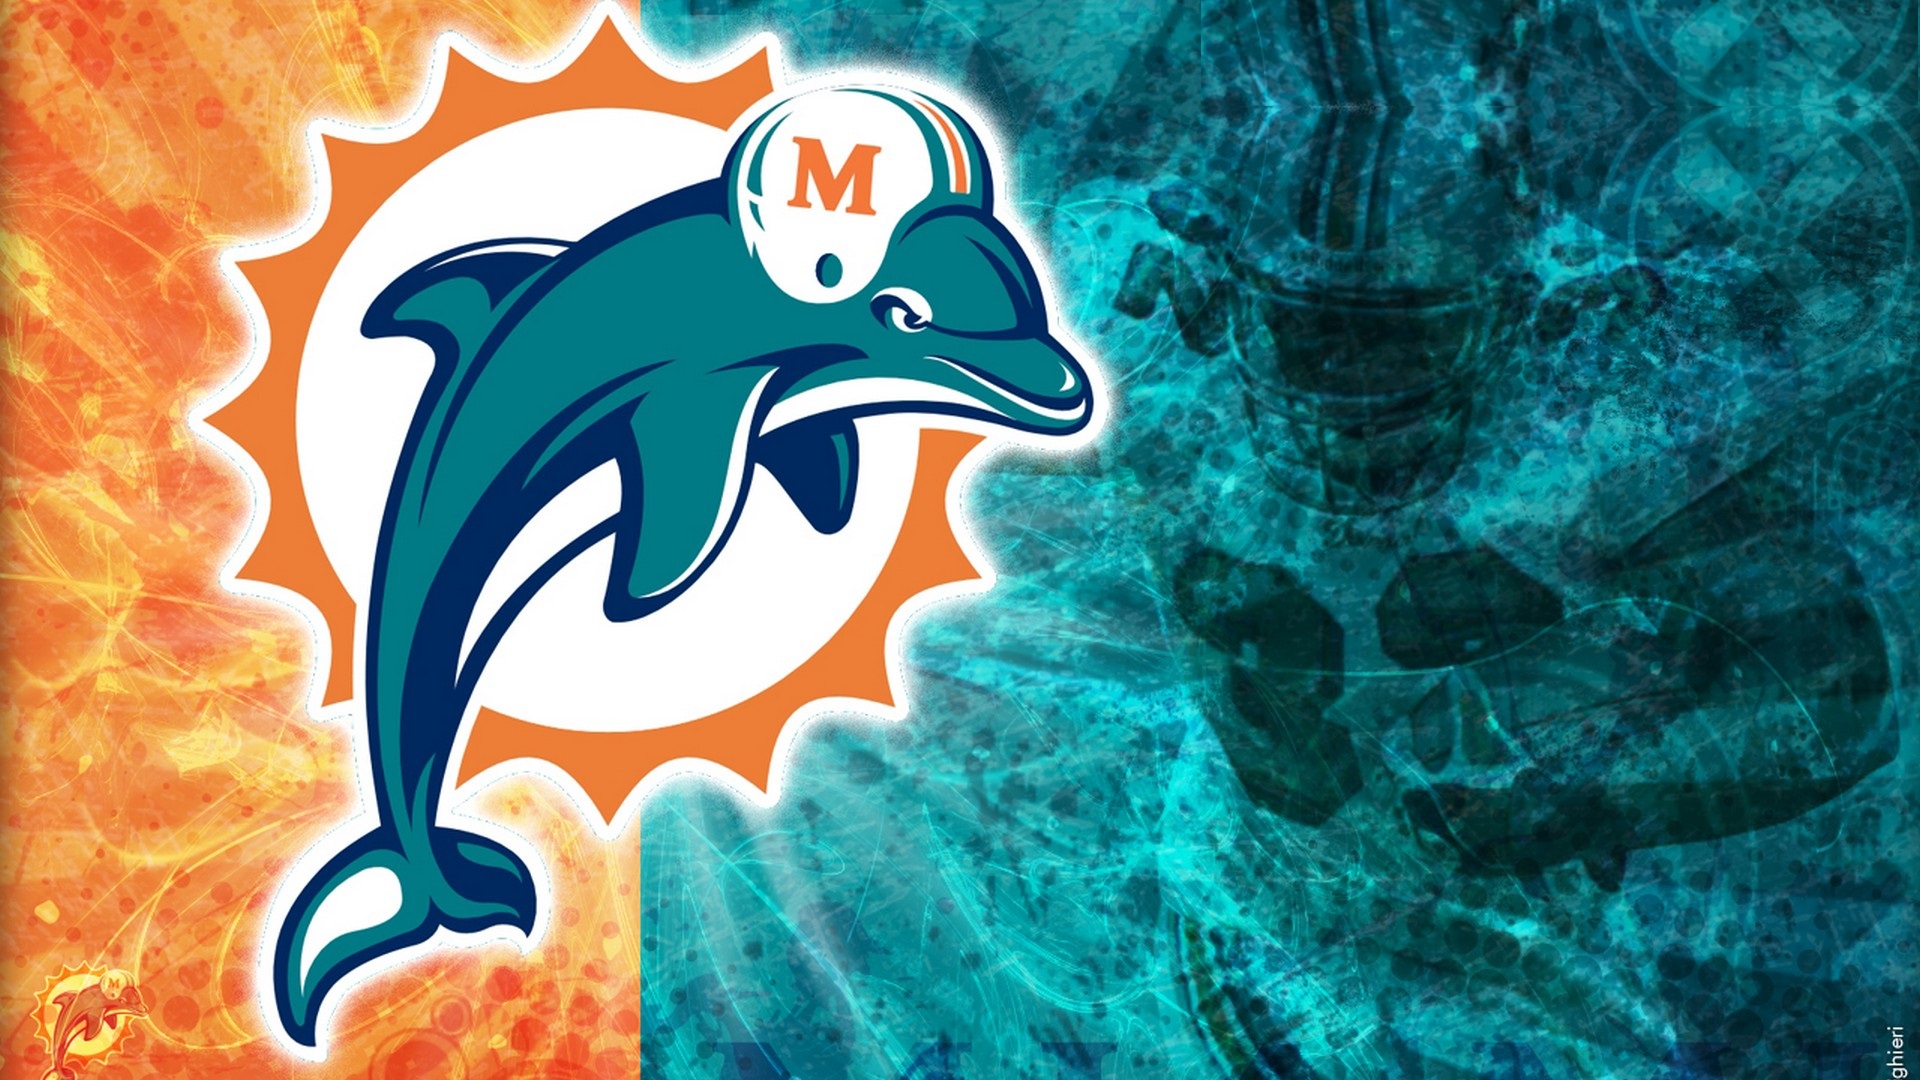 HD Miami Dolphins Wallpapers With Resolution 1920X1080 pixel. You can make this wallpaper for your Mac or Windows Desktop Background, iPhone, Android or Tablet and another Smartphone device for free